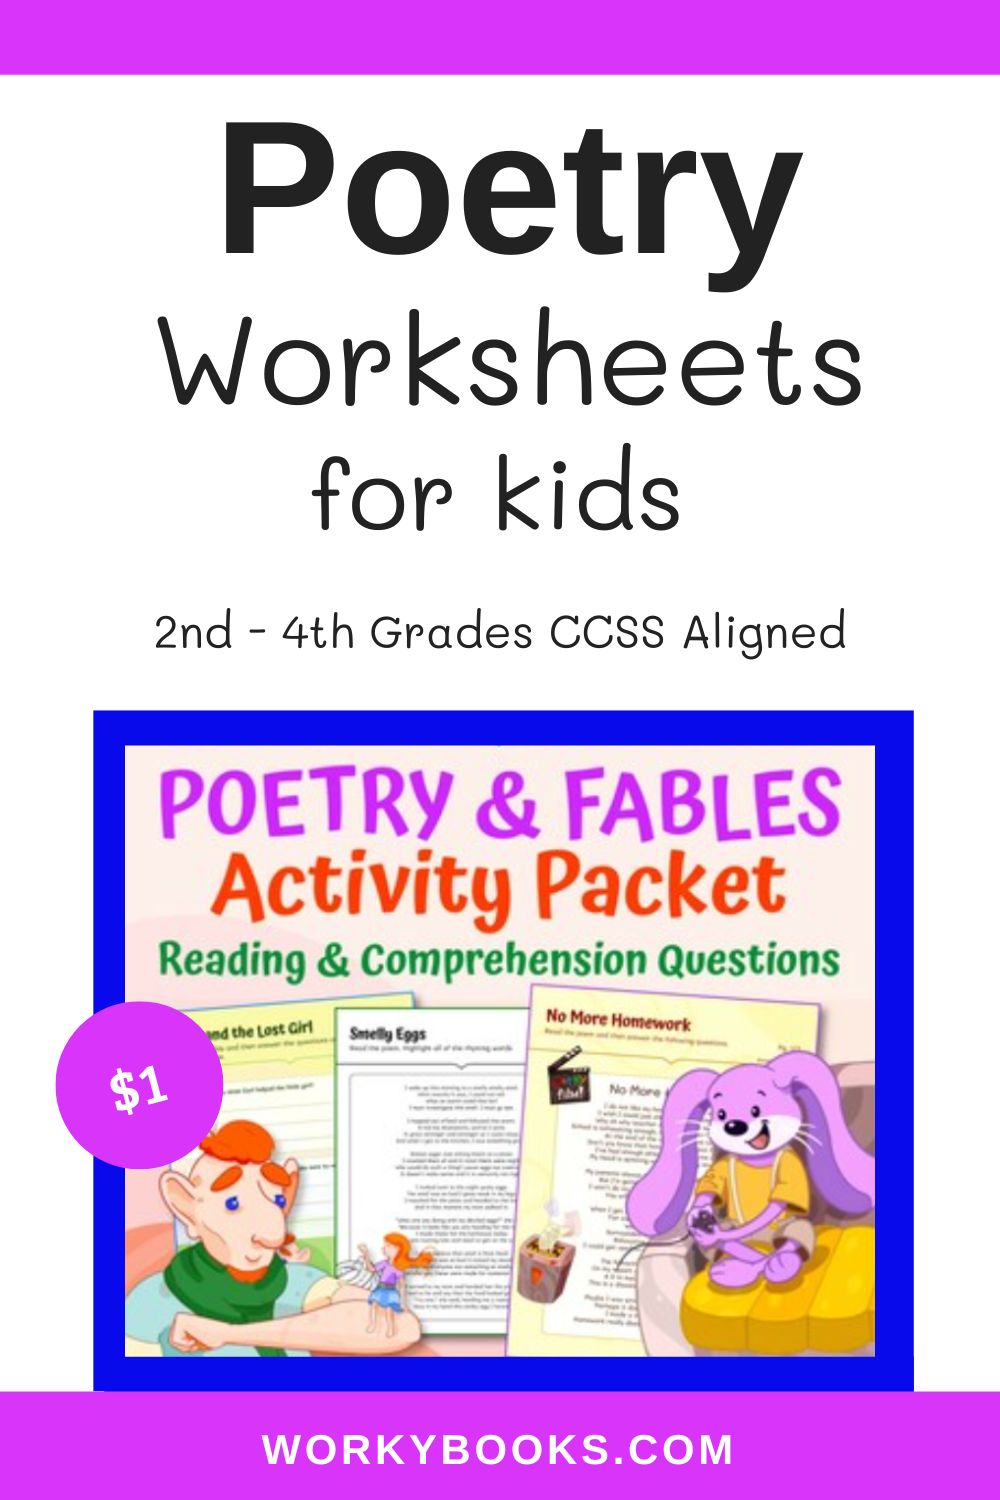 Poetry worksheets for kids